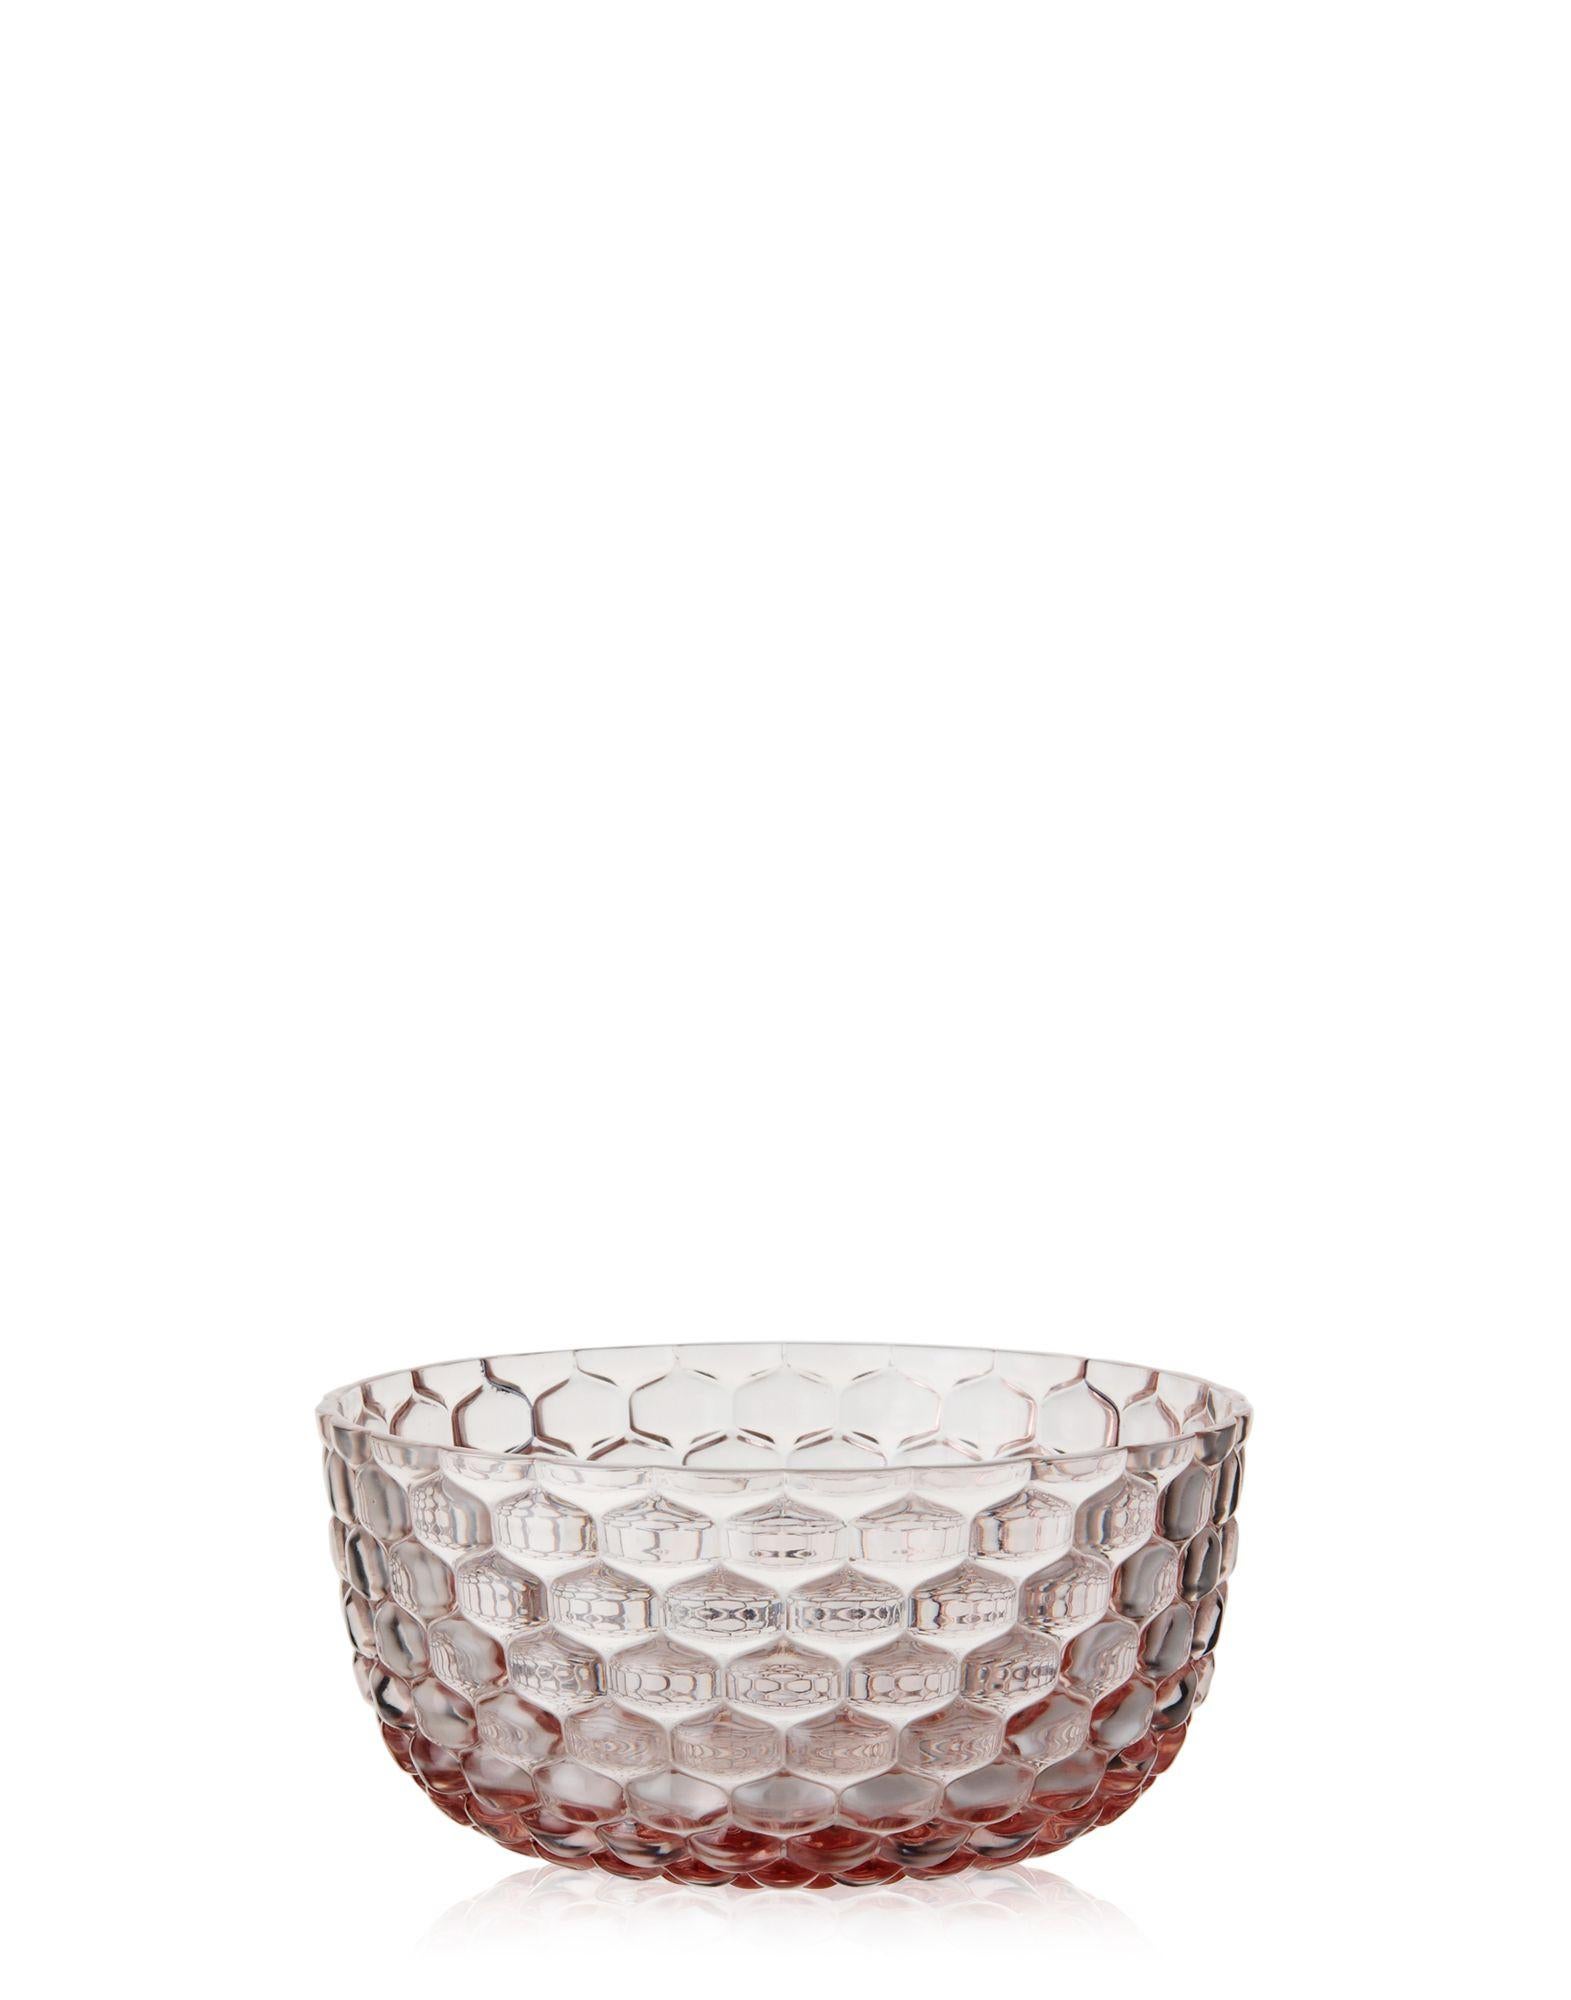 The Jelly bowls are part of a new series of design items through which Kartell, in its continuous search for new tactile and aesthetic effects, once again demonstrates its technological know-how in experimenting with the textures of surfaces. Ideal